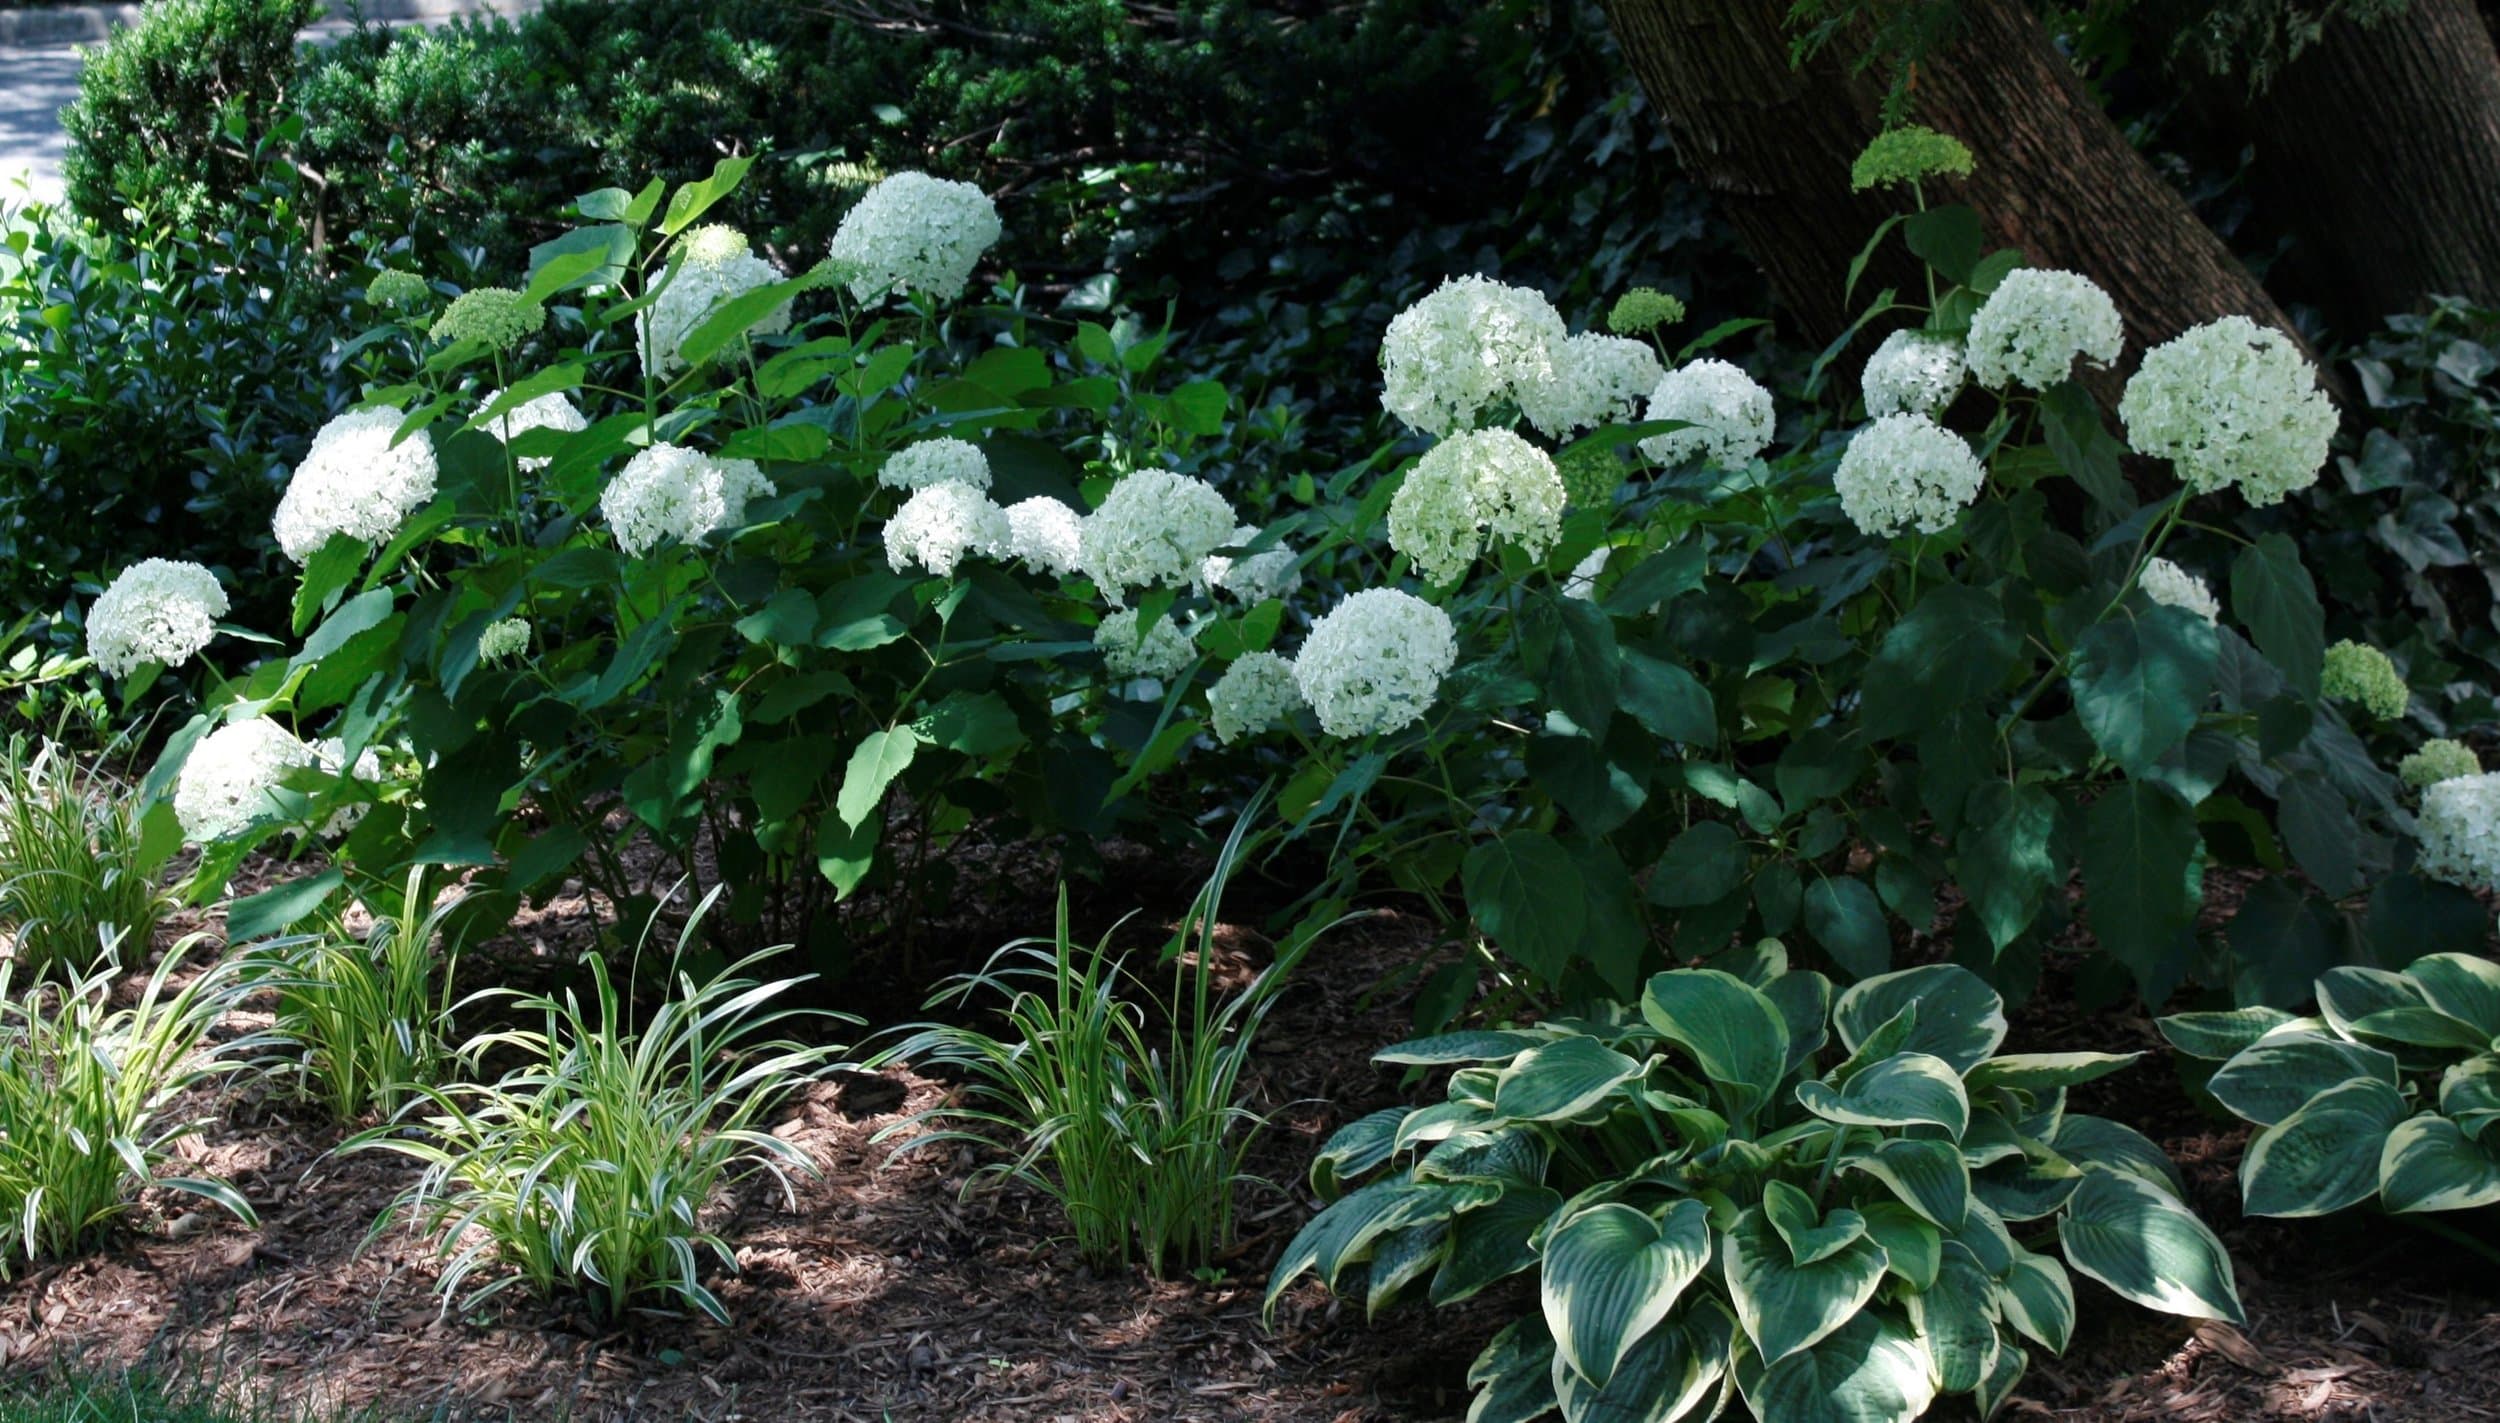 Planting is the shade under a tree with hydrangea, hosta and liriope